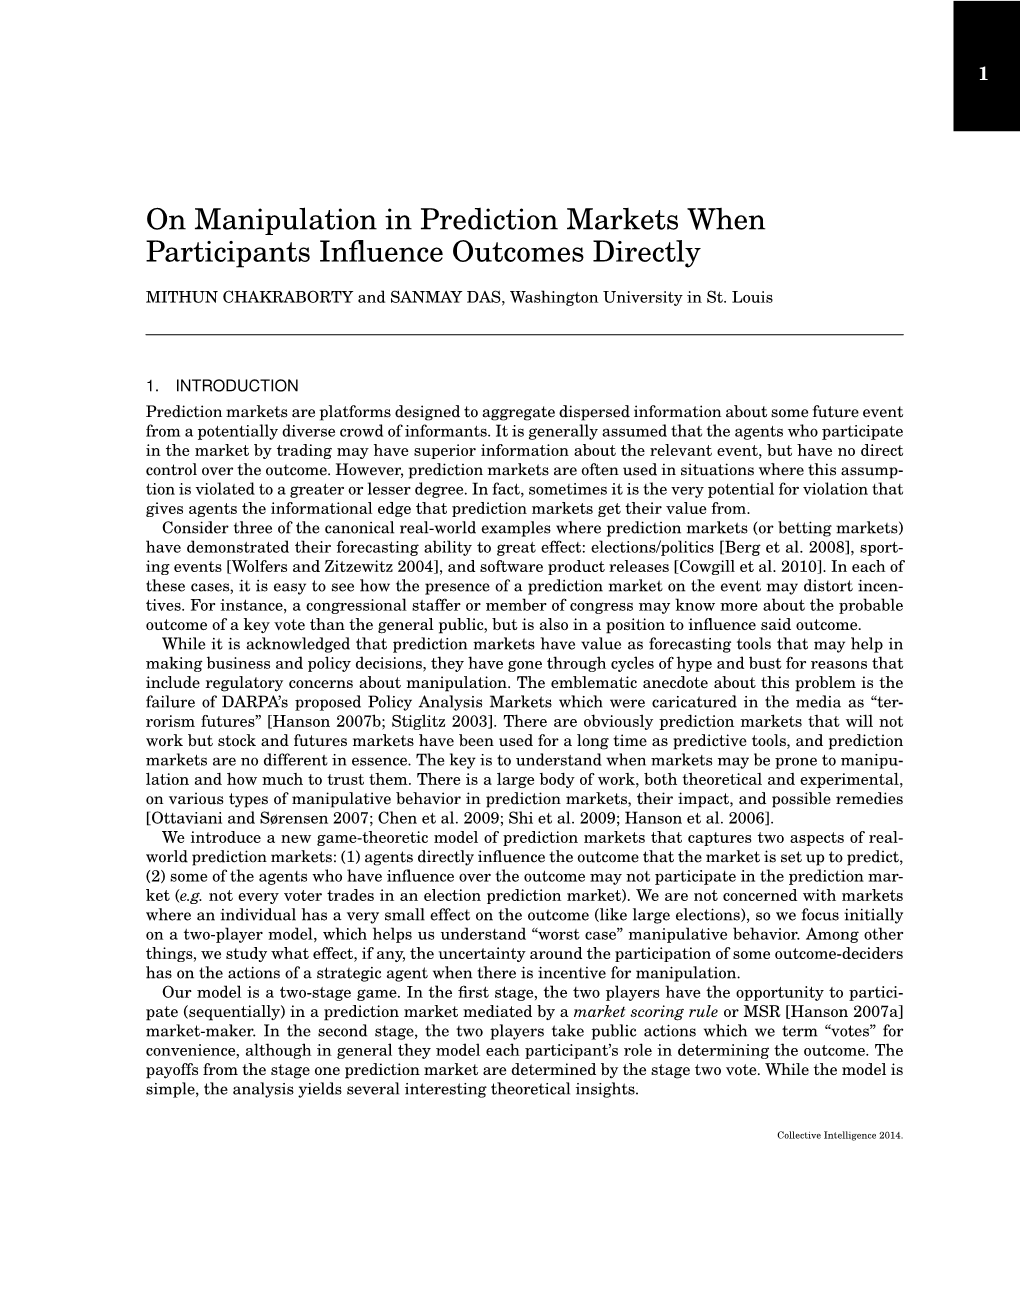 On Manipulation in Prediction Markets When Participants Influence